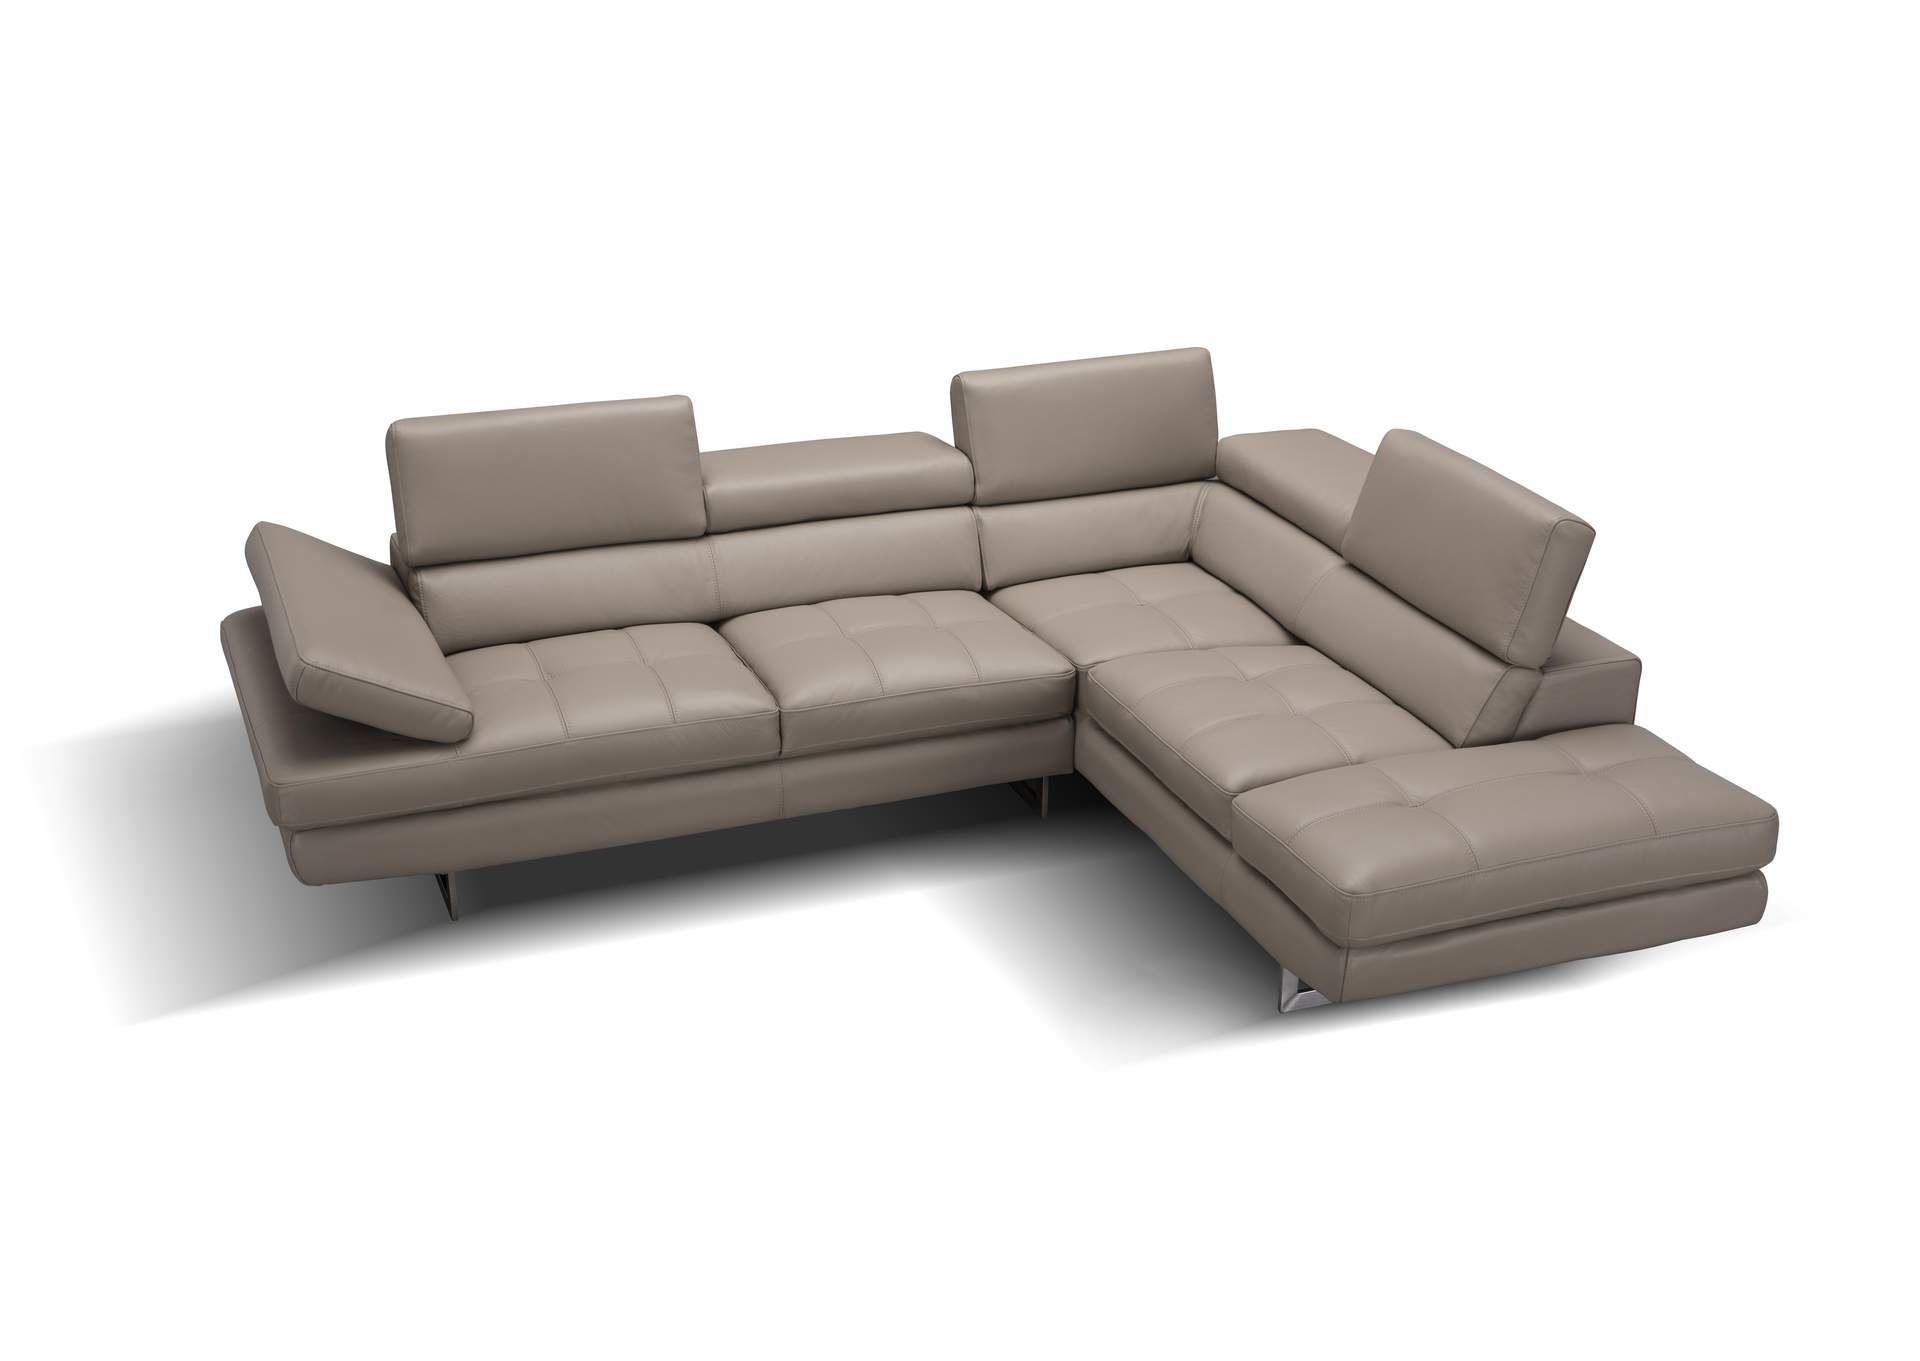 A761 Italian Leather Sectional Slate Peanut In Right Hand Facing,J&M Furniture